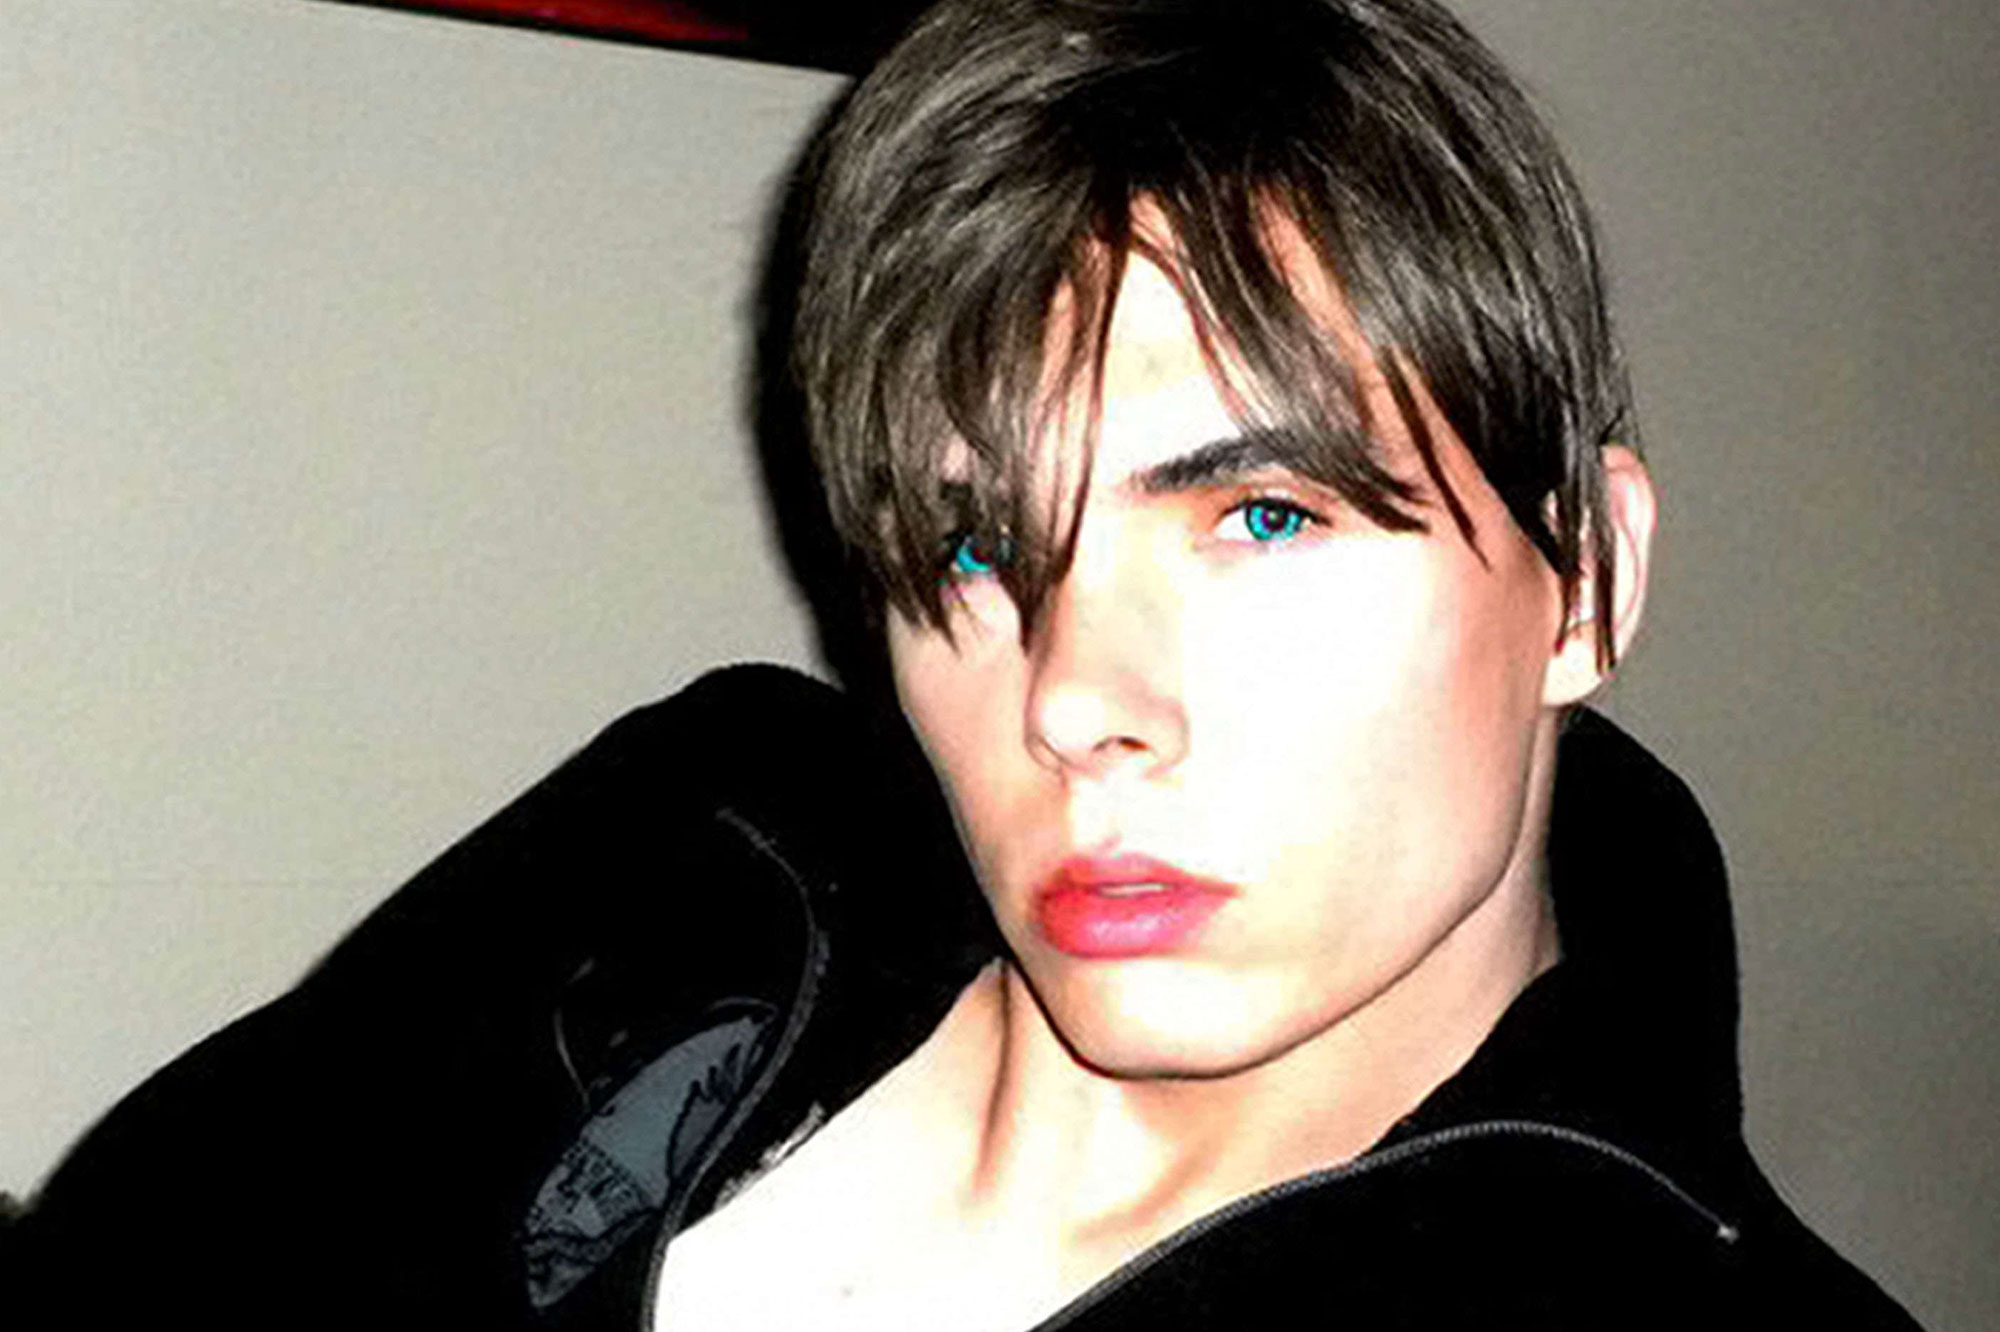 Mandatory Credit: Photo by Rex Features (1733887b) Luka Magnotta Luka Magnotta murder suspect - Jun 2012 Luka Magnotta, 29, who is wanted for the cannibalistic murder of his gay lover Jun Lin, 33, who was found chopped up and eaten. Interpol launched a hunt for Magnotta after a headless torso was found behind Magnotta's flat in Montreal and a hand and foot were posted to political parties in Ottawa. Magnotta, a gay porn film actor, who is also known by the names Eric Clinton Newman and Vladimir Romanov, was spotted in Paris and police found items of his in a Paris hotel room. He was later arrested in a Berlin internet cafe. Magnotta is seen here in one of many photos he posted of himself on social networks on the internet. /Rex_LUKA_MAGNOTTA_1733887B//1206081440